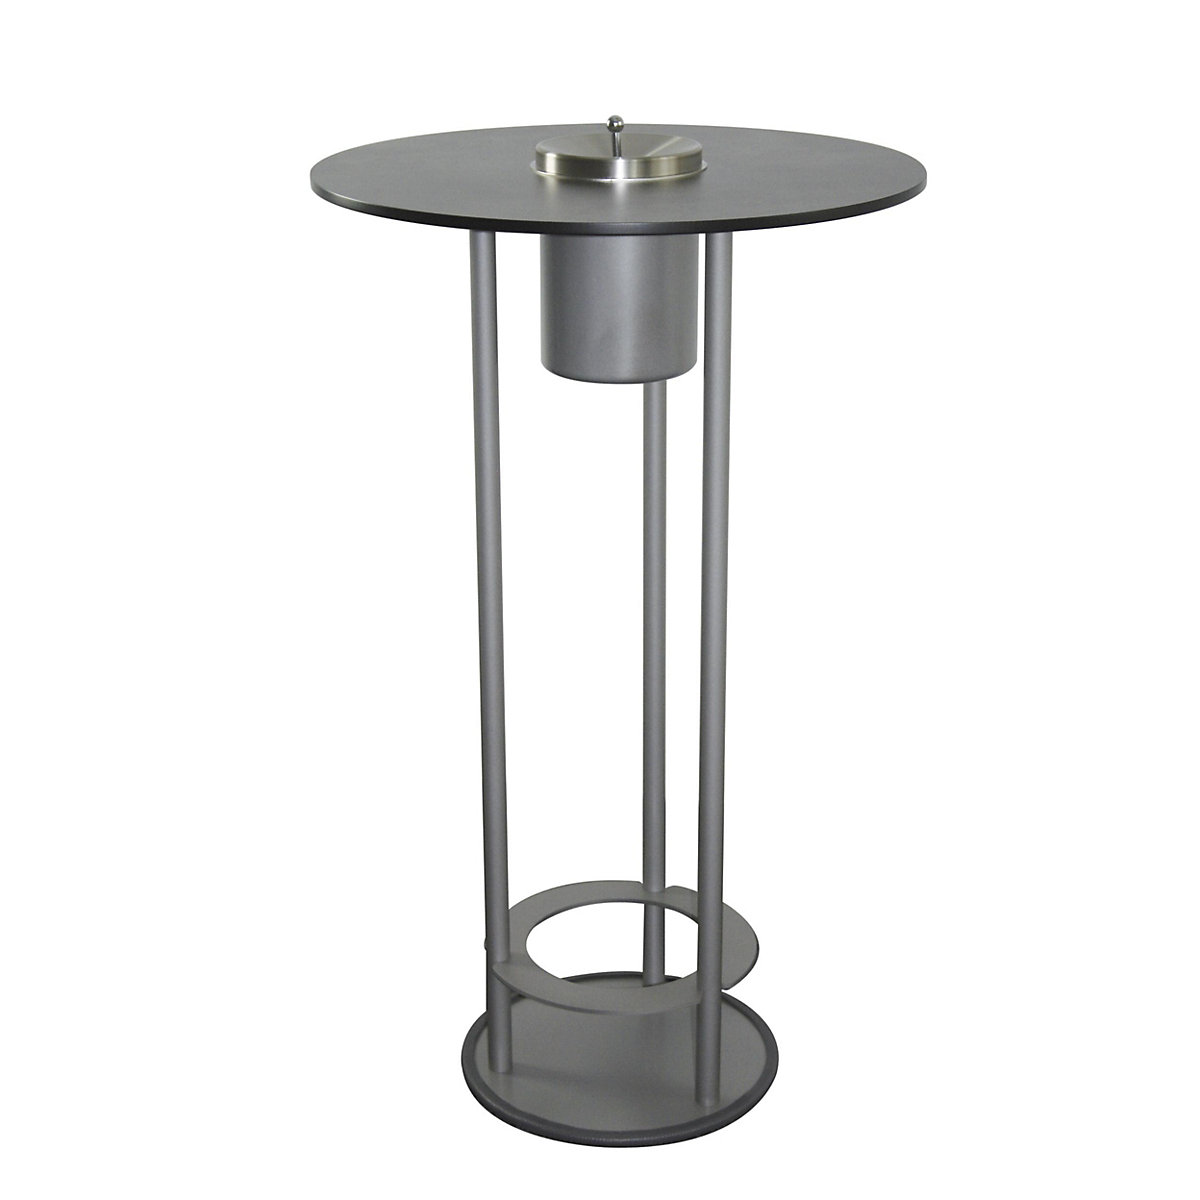 Pedestal table for smokers